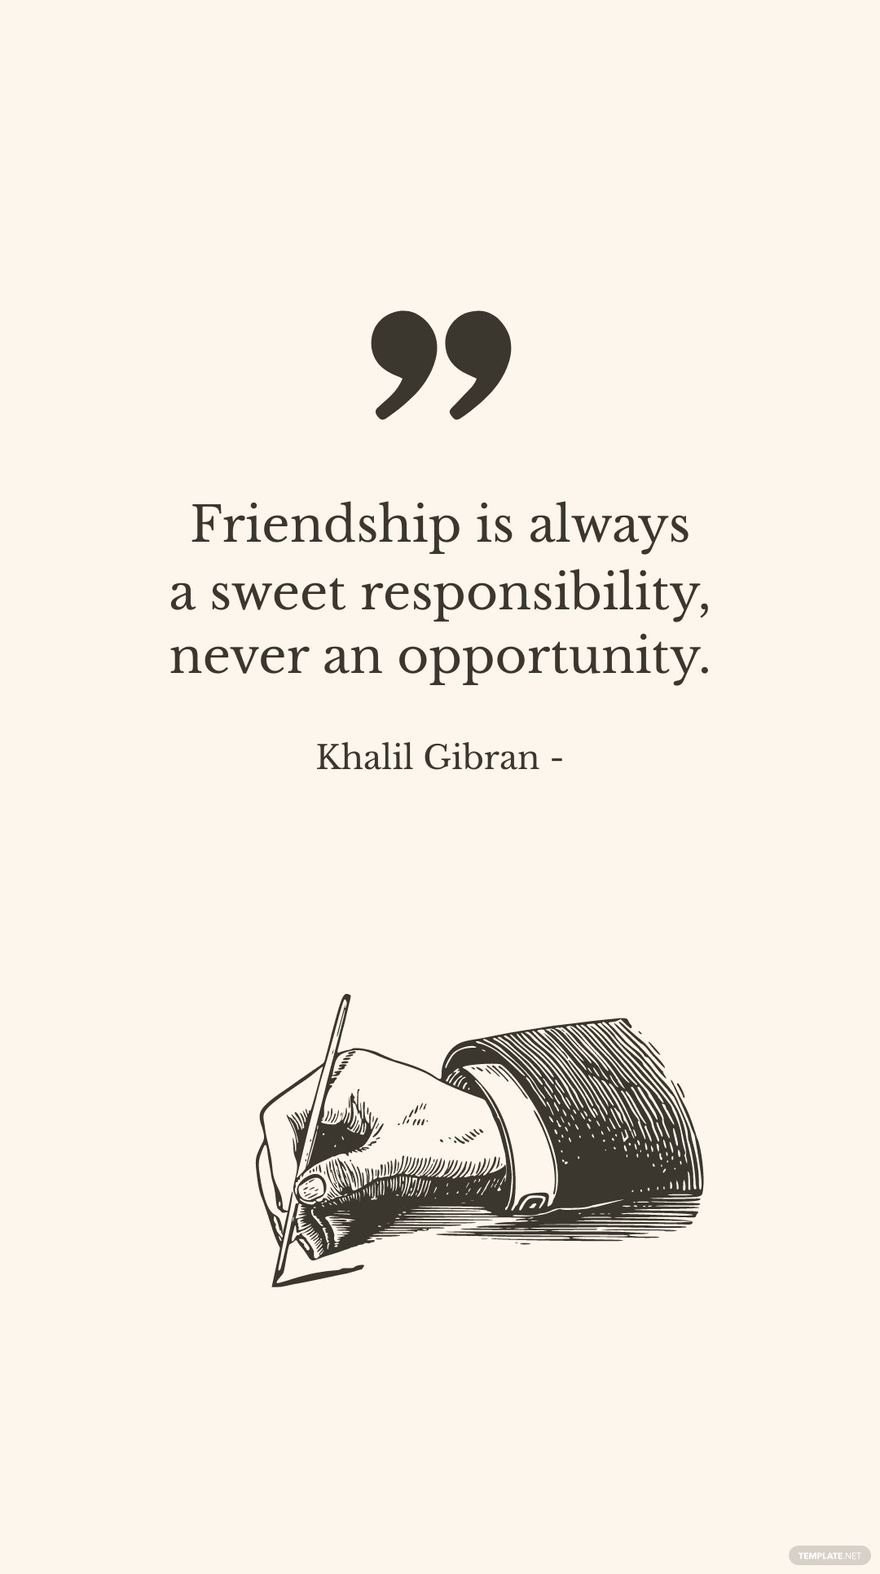 Khalil Gibran - Friendship is always a sweet responsibility, never an opportunity.